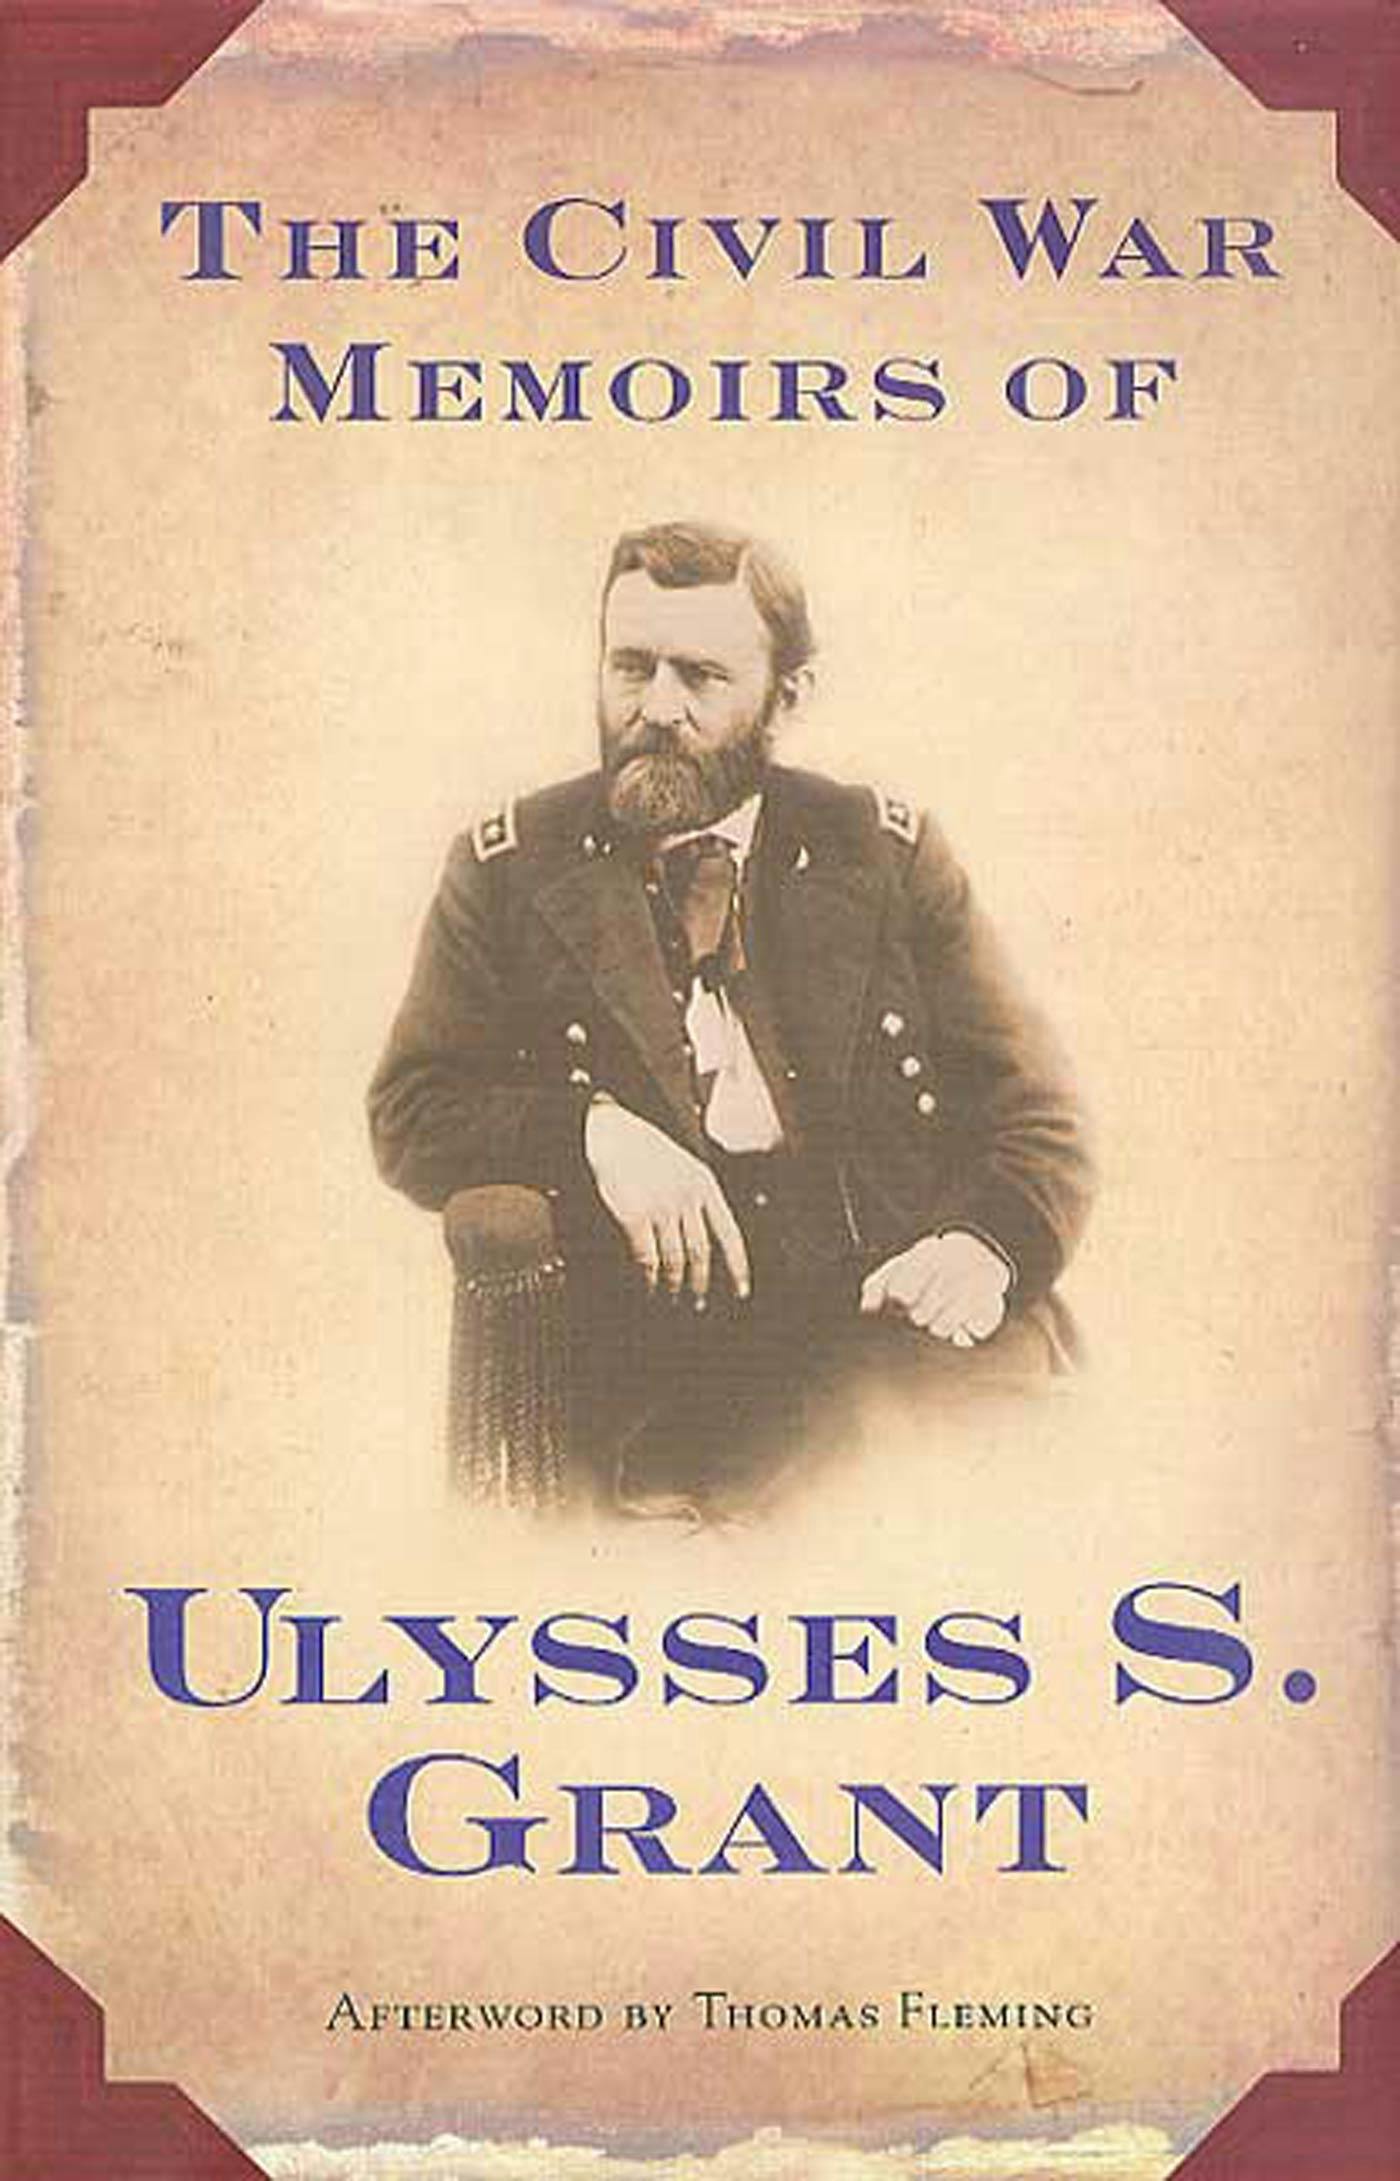 Cover for the book titled as: The Civil War Memoirs of Ulysses S. Grant